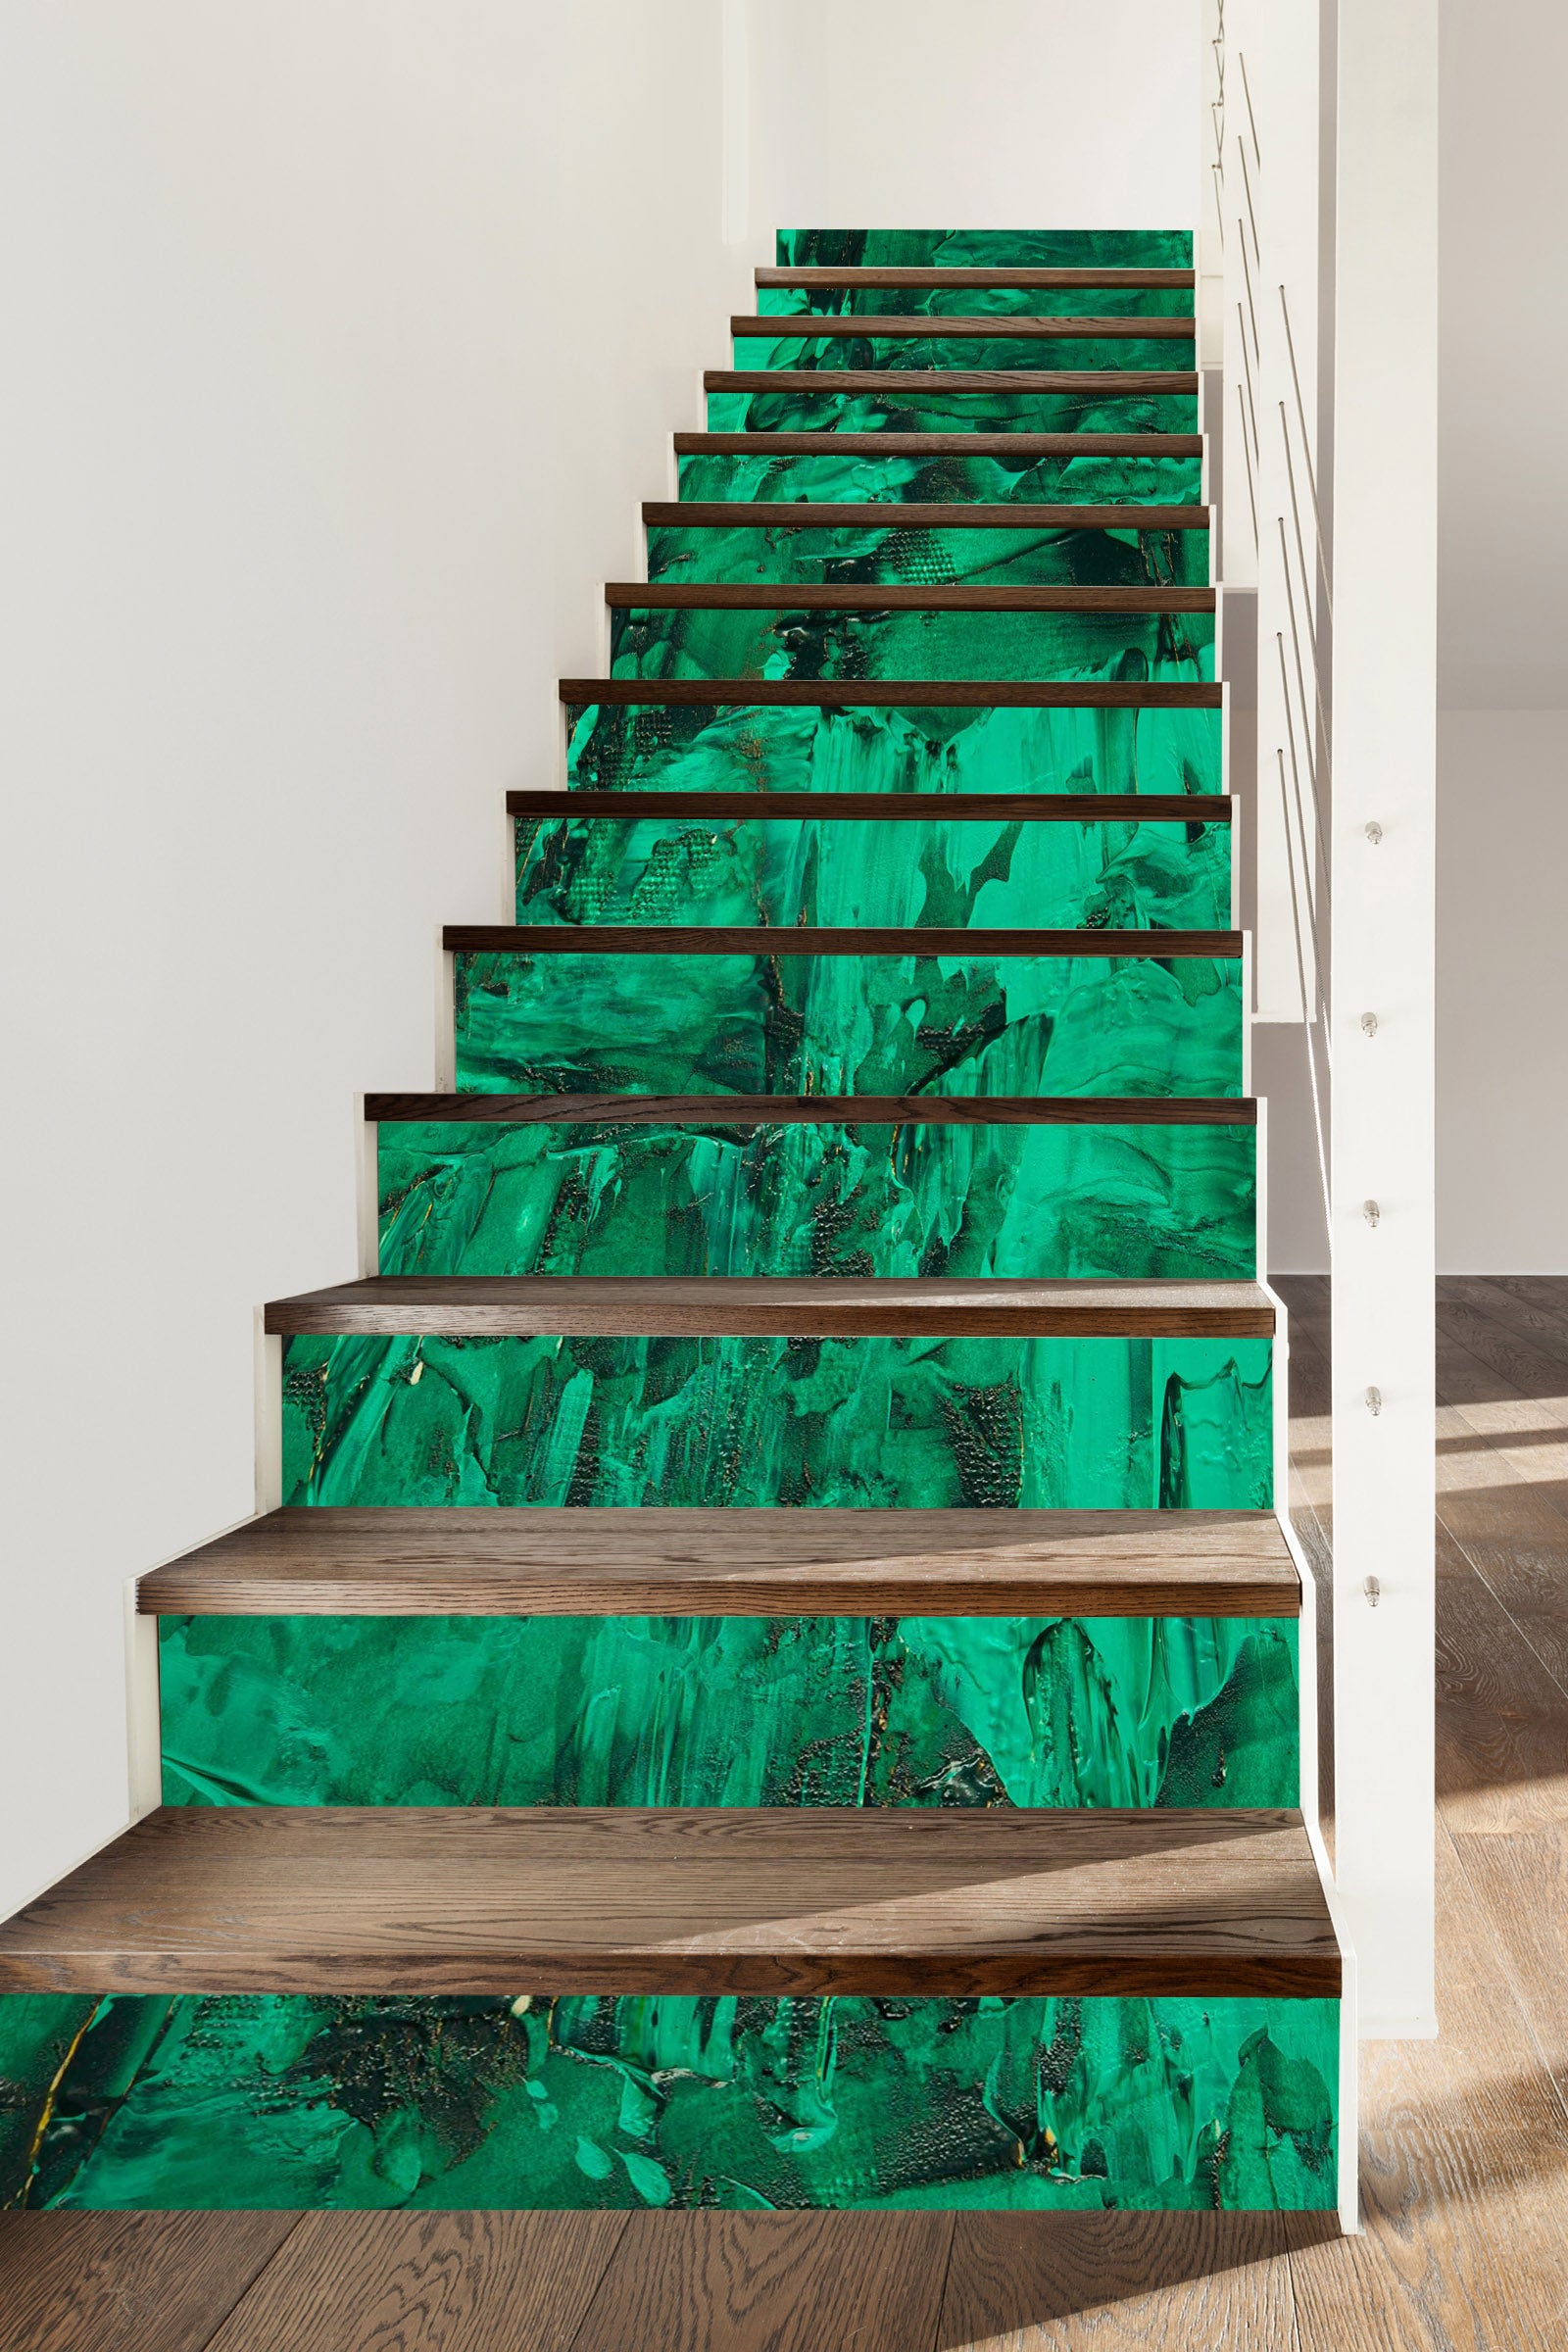 3D Stacked Fluorescent Green 583 Stair Risers